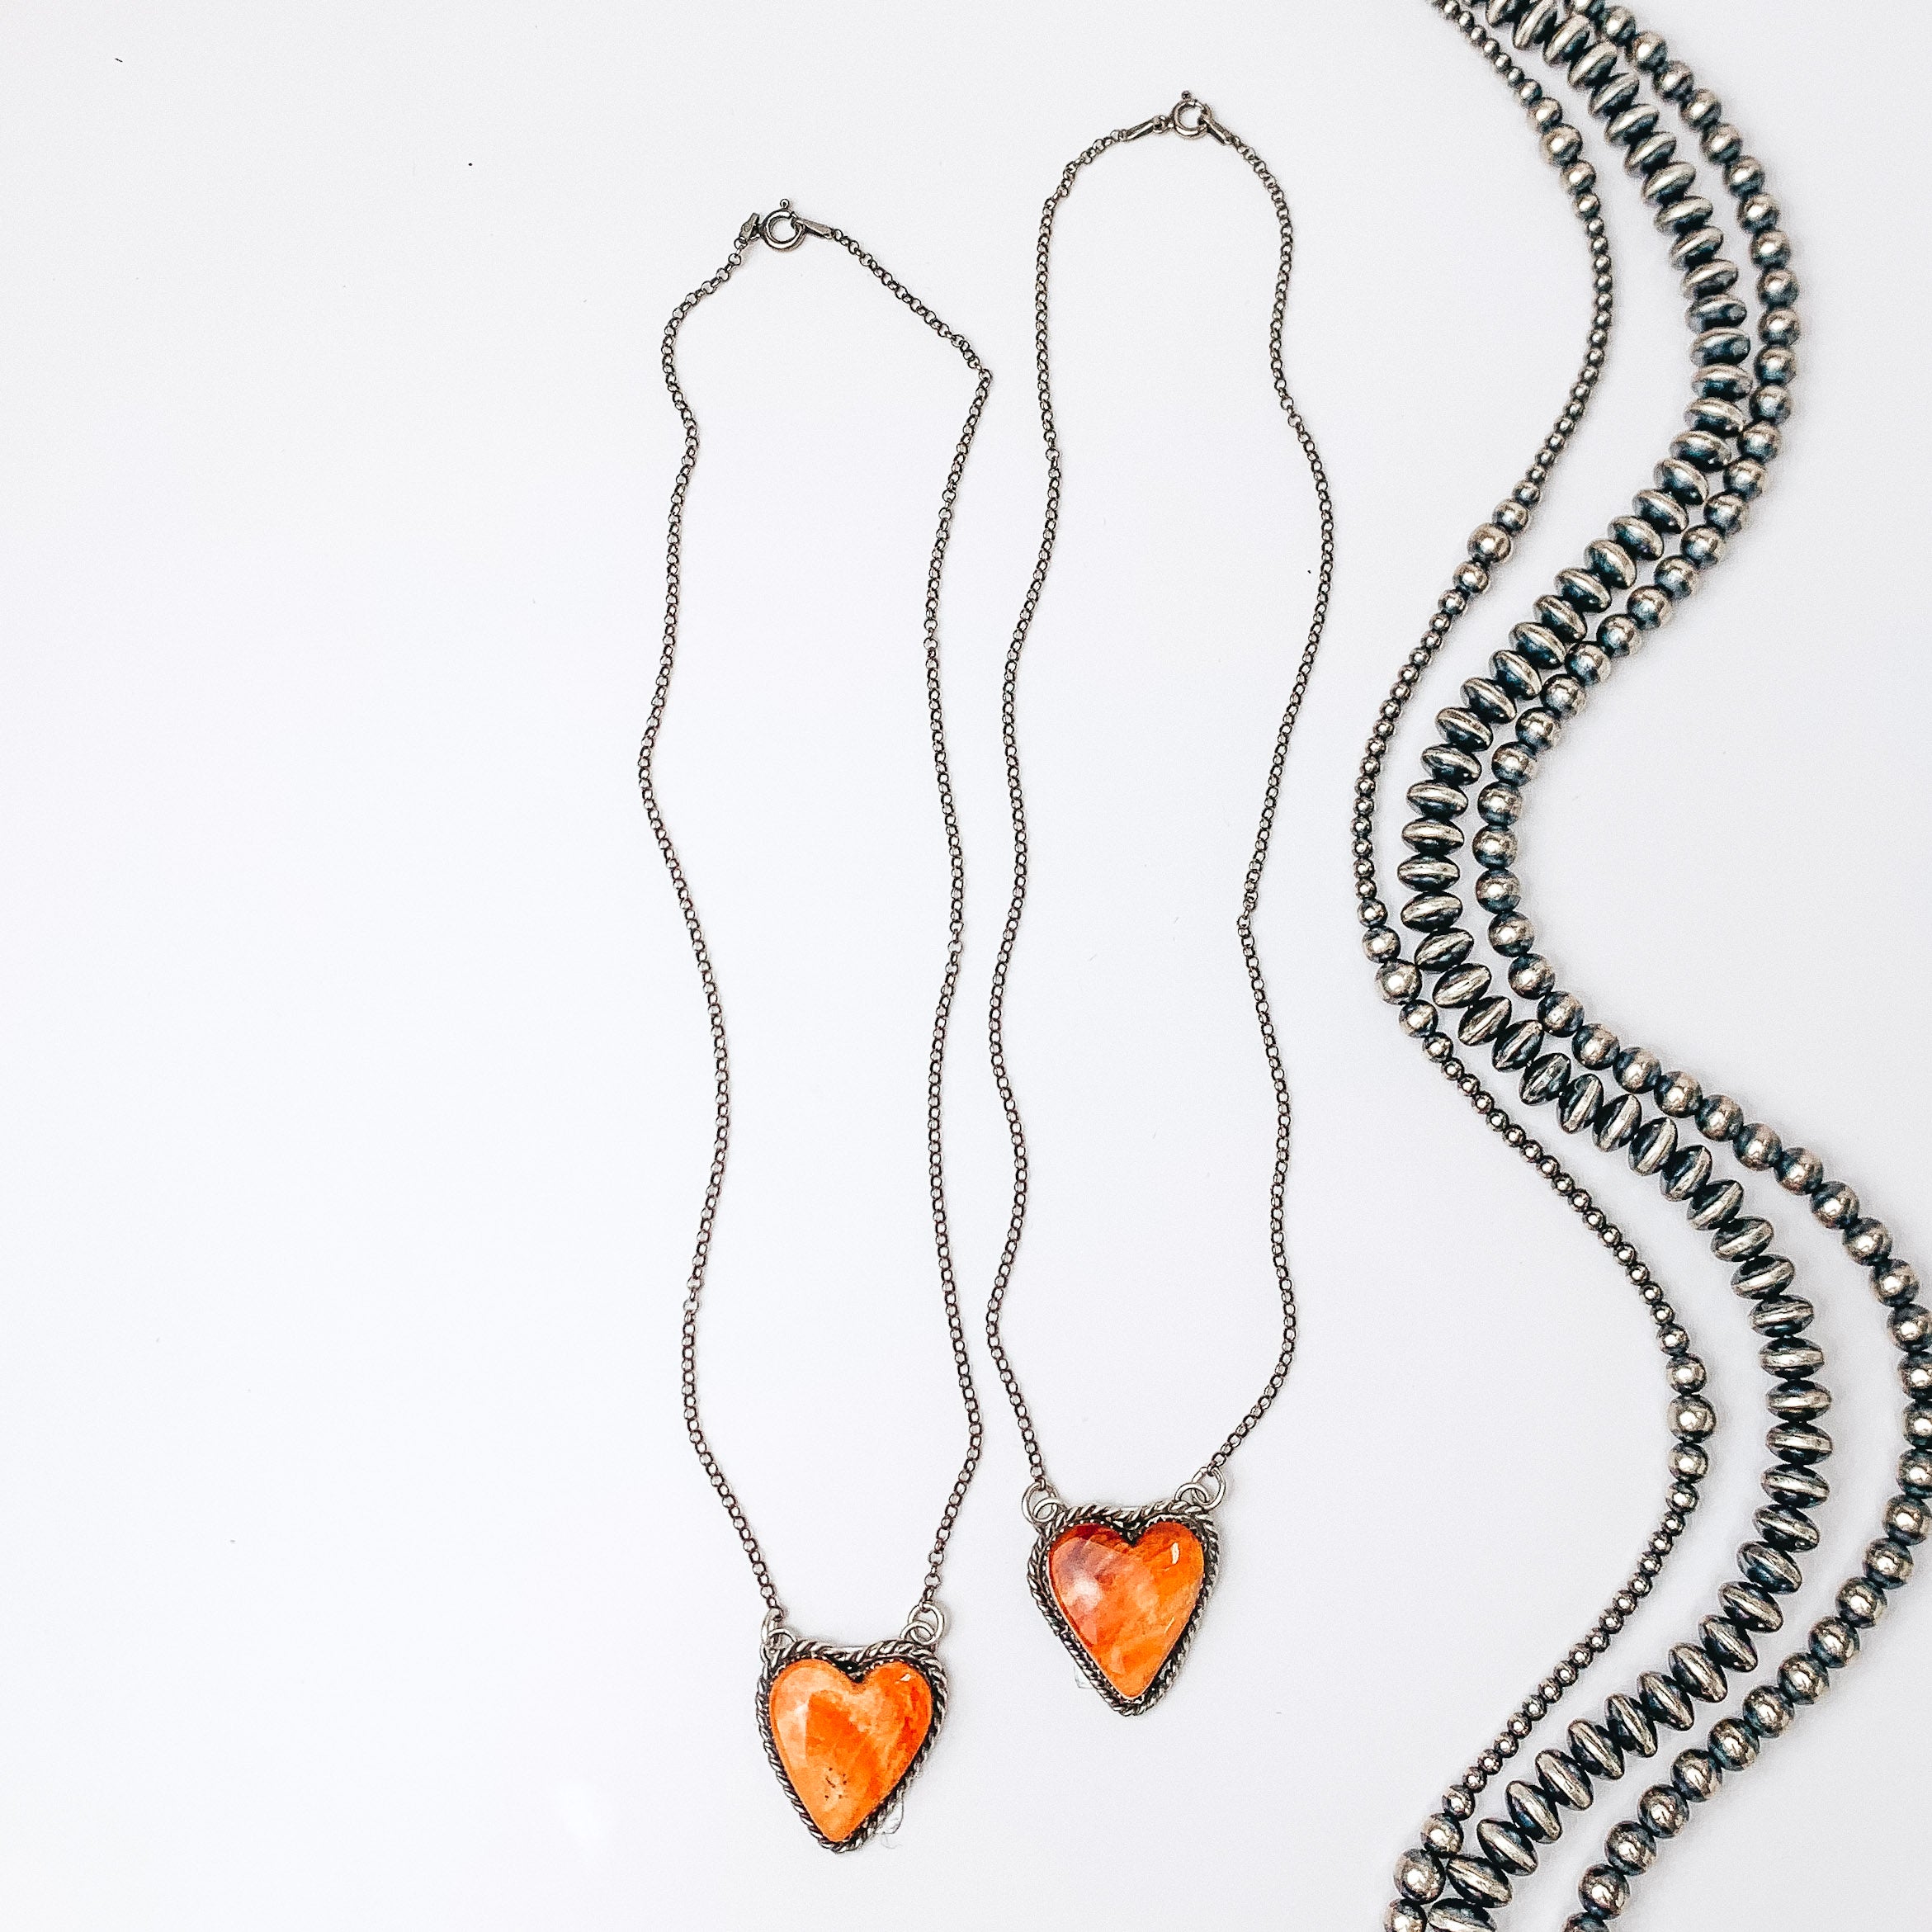 Centered in the middle of the picture is a silver necklace with a spiny oyster heart pendant. Navajo pearls are laid to the right of the necklace, all on a white background. 